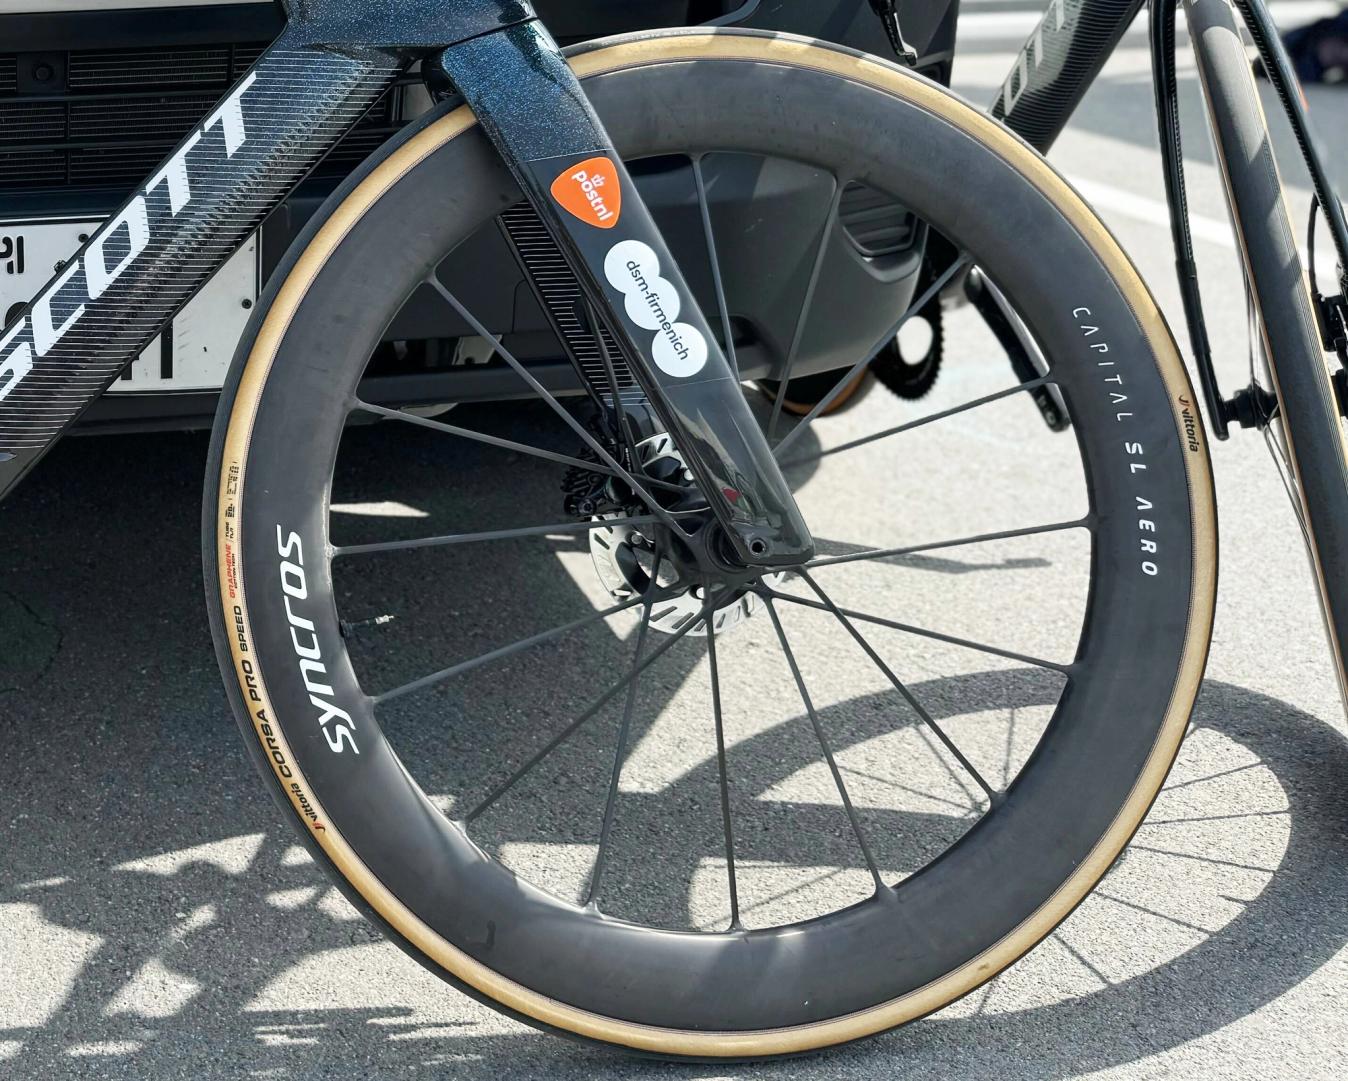 Elsewhere, dsm-firmenich PostNL are one of the only teams who swap wheel brands for time trialling. The Dutch outfit uses Shimano for road races but Syncros for efforts against the clock